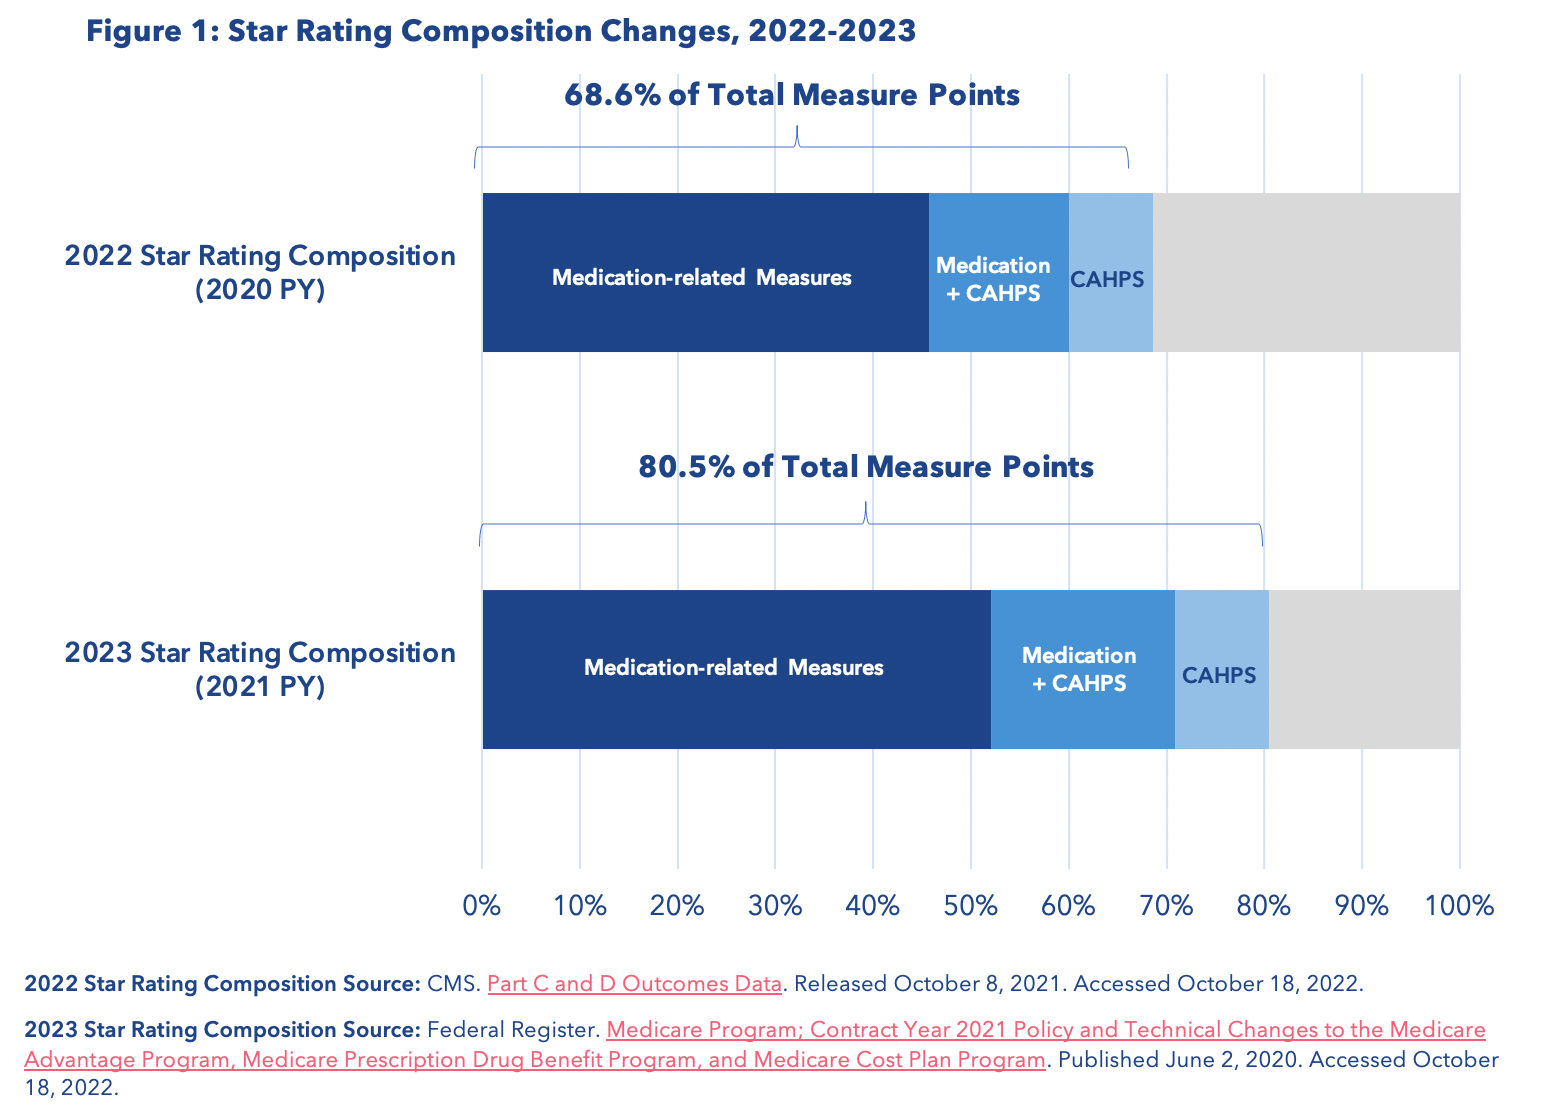 Figure 1. Star Rating Composition Changes, 2022-2023